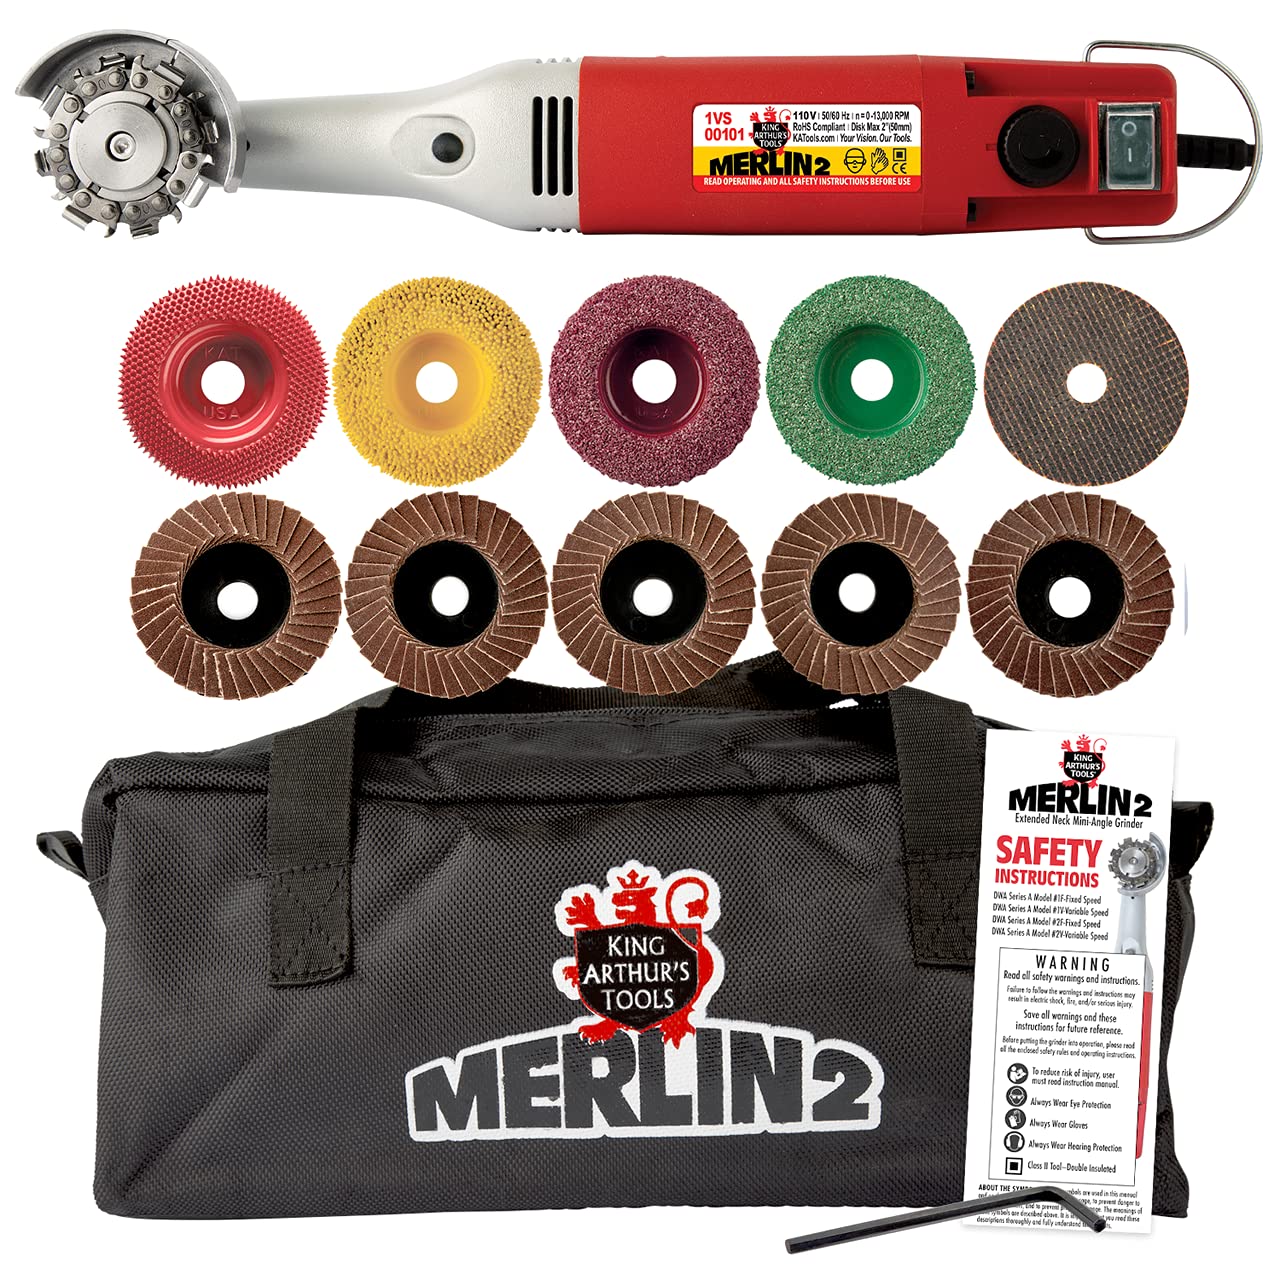 King Arthurs Tools Premium Carving Set MERLIN2 Handheld Variable Speed Mini Angle Grinder Power Tool with 11 Accessories